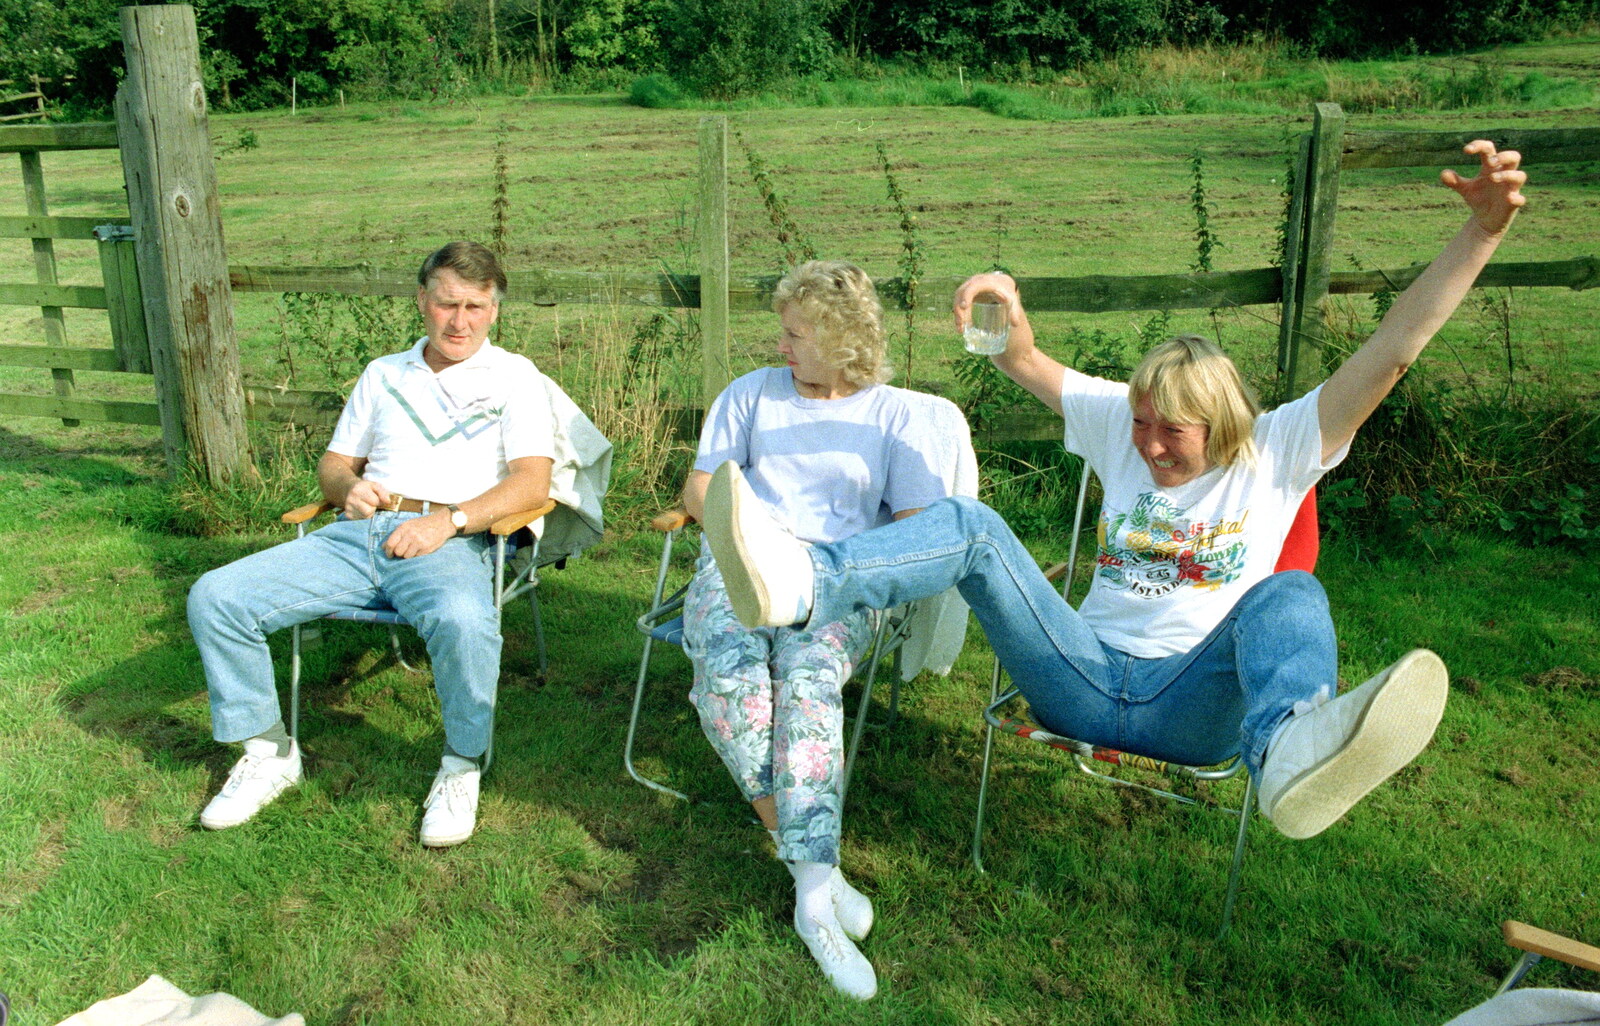 Bernie, Jean and 'Mad' Sue from A Geoff and Brenda Barbeque, Stuston, Suffolk - 3rd April 1994